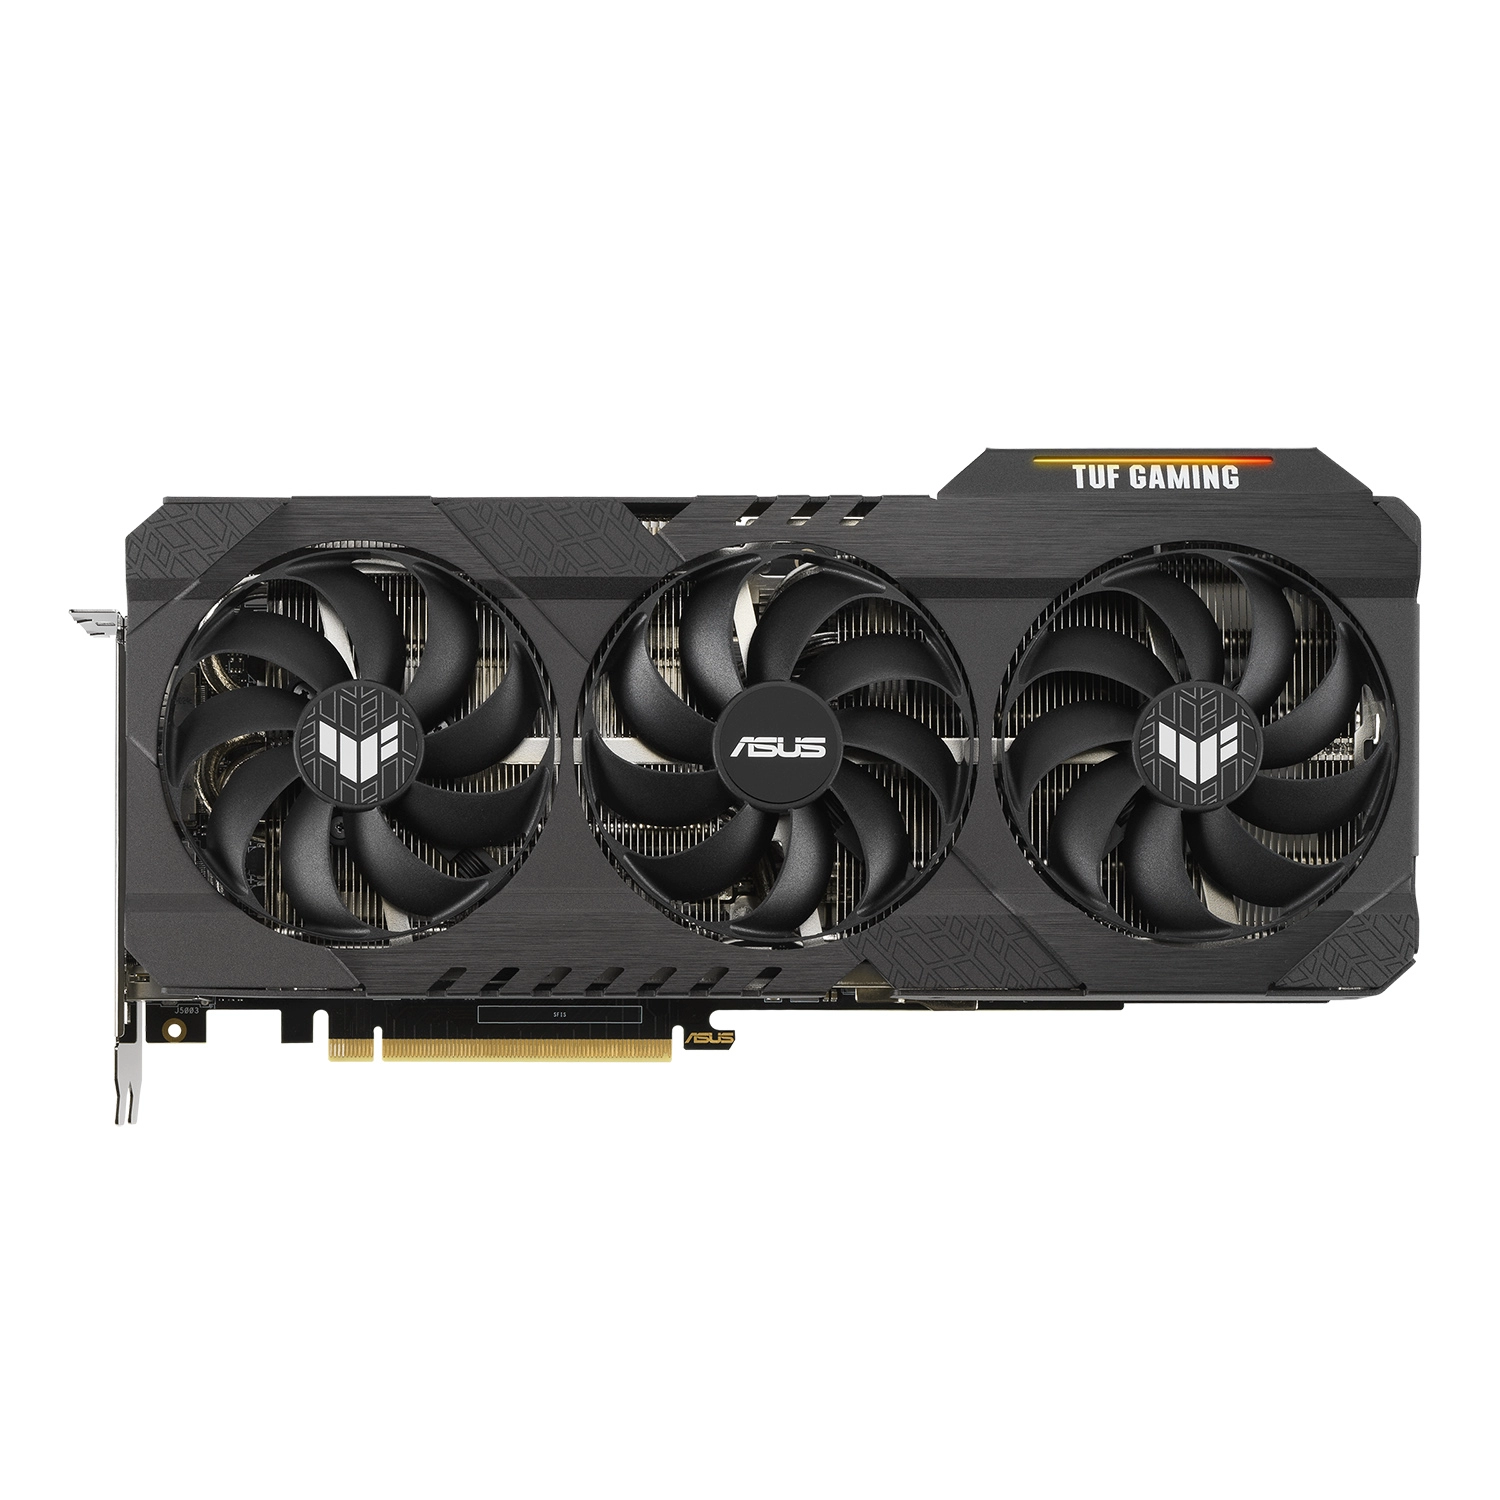 ASUS TUF Gaming GeForce RTX 3070 Ti OC Edition 8GB Top View